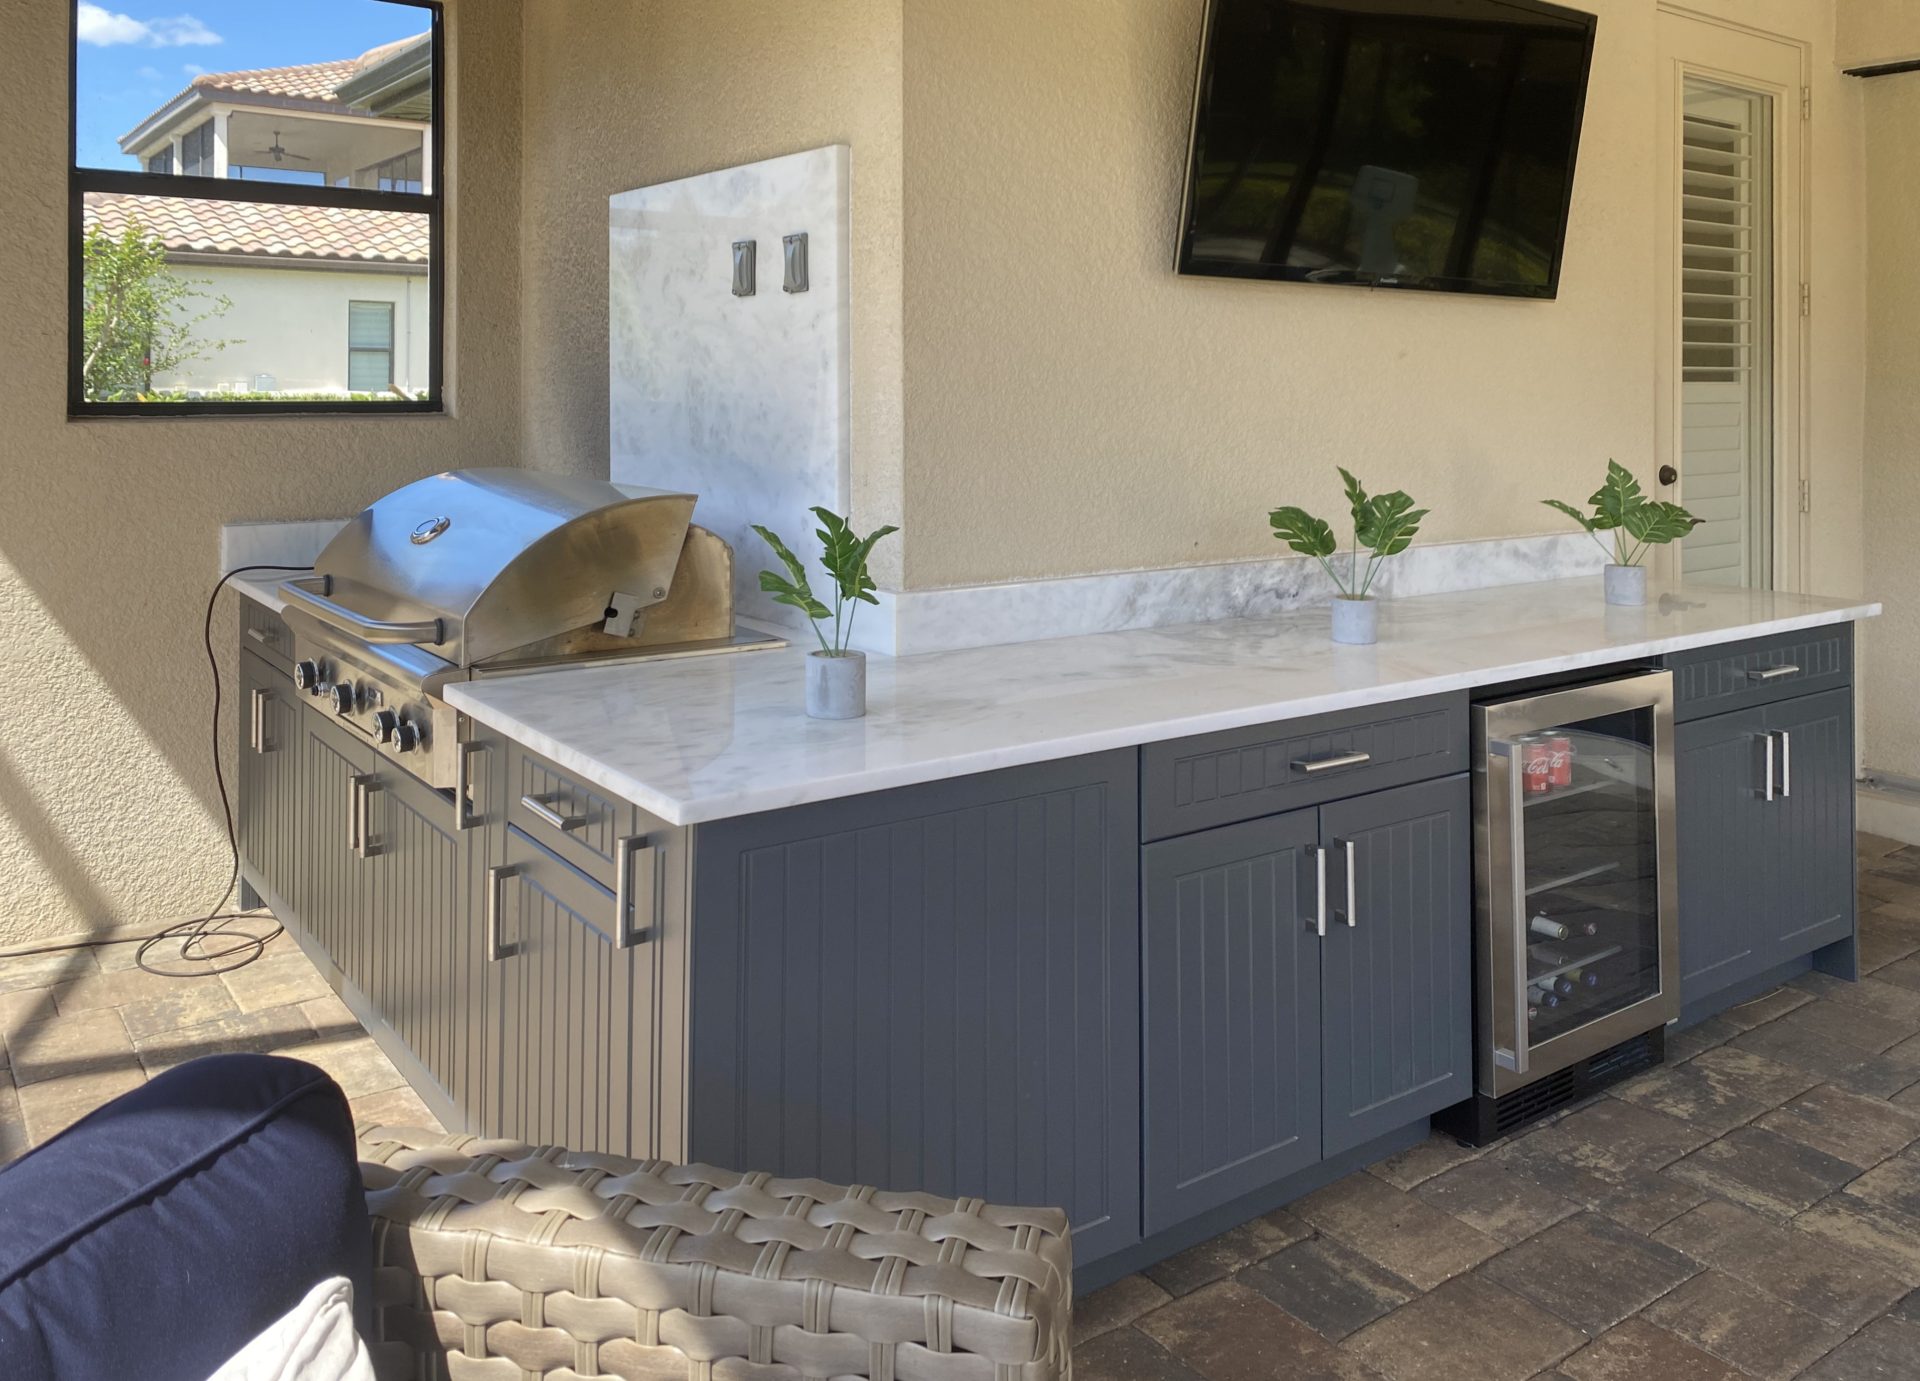 OUTDOOR KITCHEN 40. Custom outdoor kitchen in Sarasota, FL. Kitchen features charcoal grey, v-groove style cabinets. Appliances include Lynx grill, glass front refrigerator and stainless bar pulls.